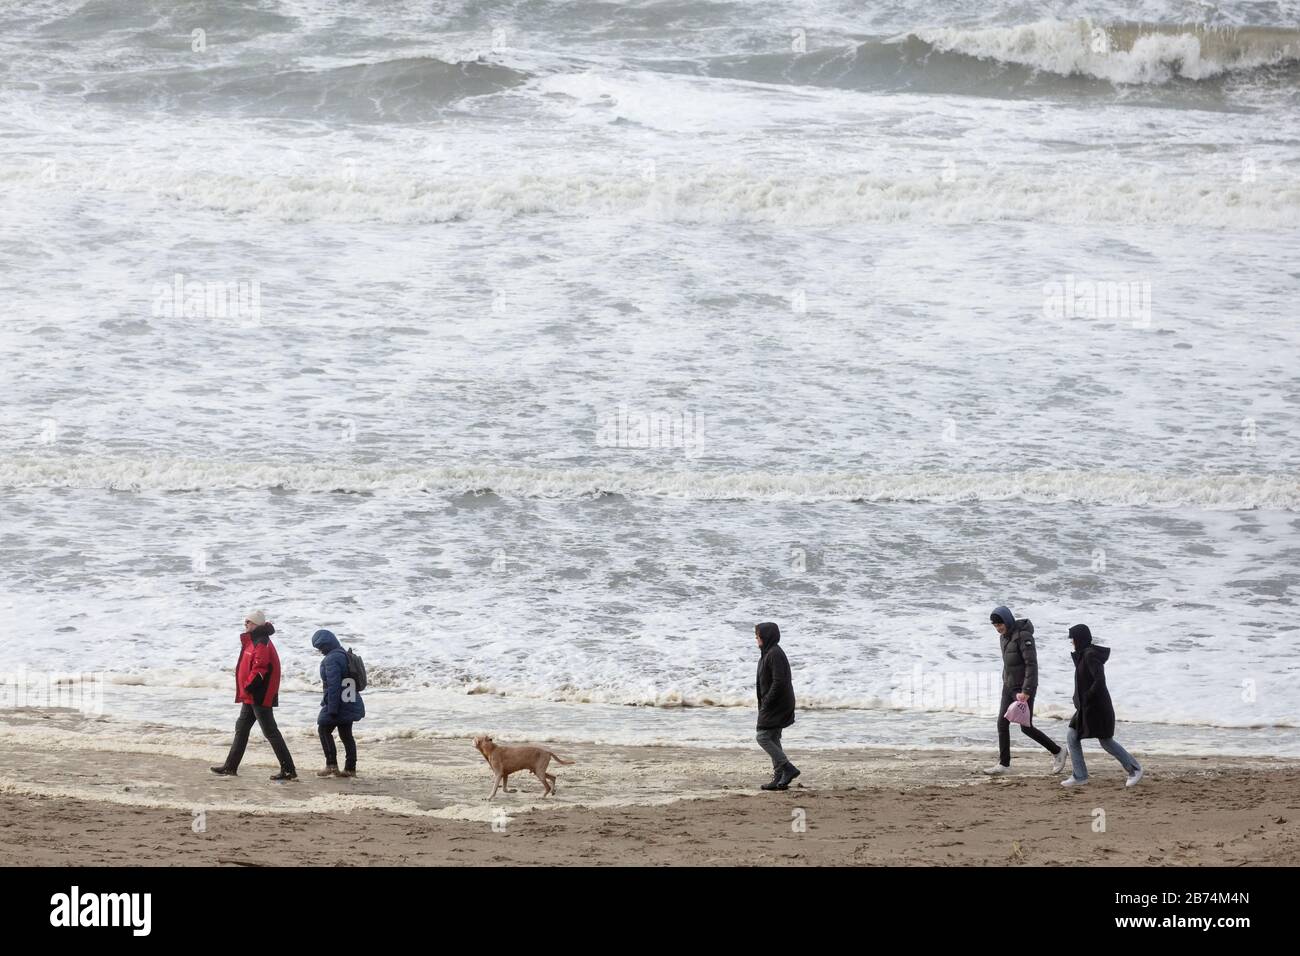 Bloemendaal aan Zee, Netherlands - February 23, 2020: beach at the Northern Sea with unidentified people. Bloemendaal aan Zee is a popular beach desti Stock Photo